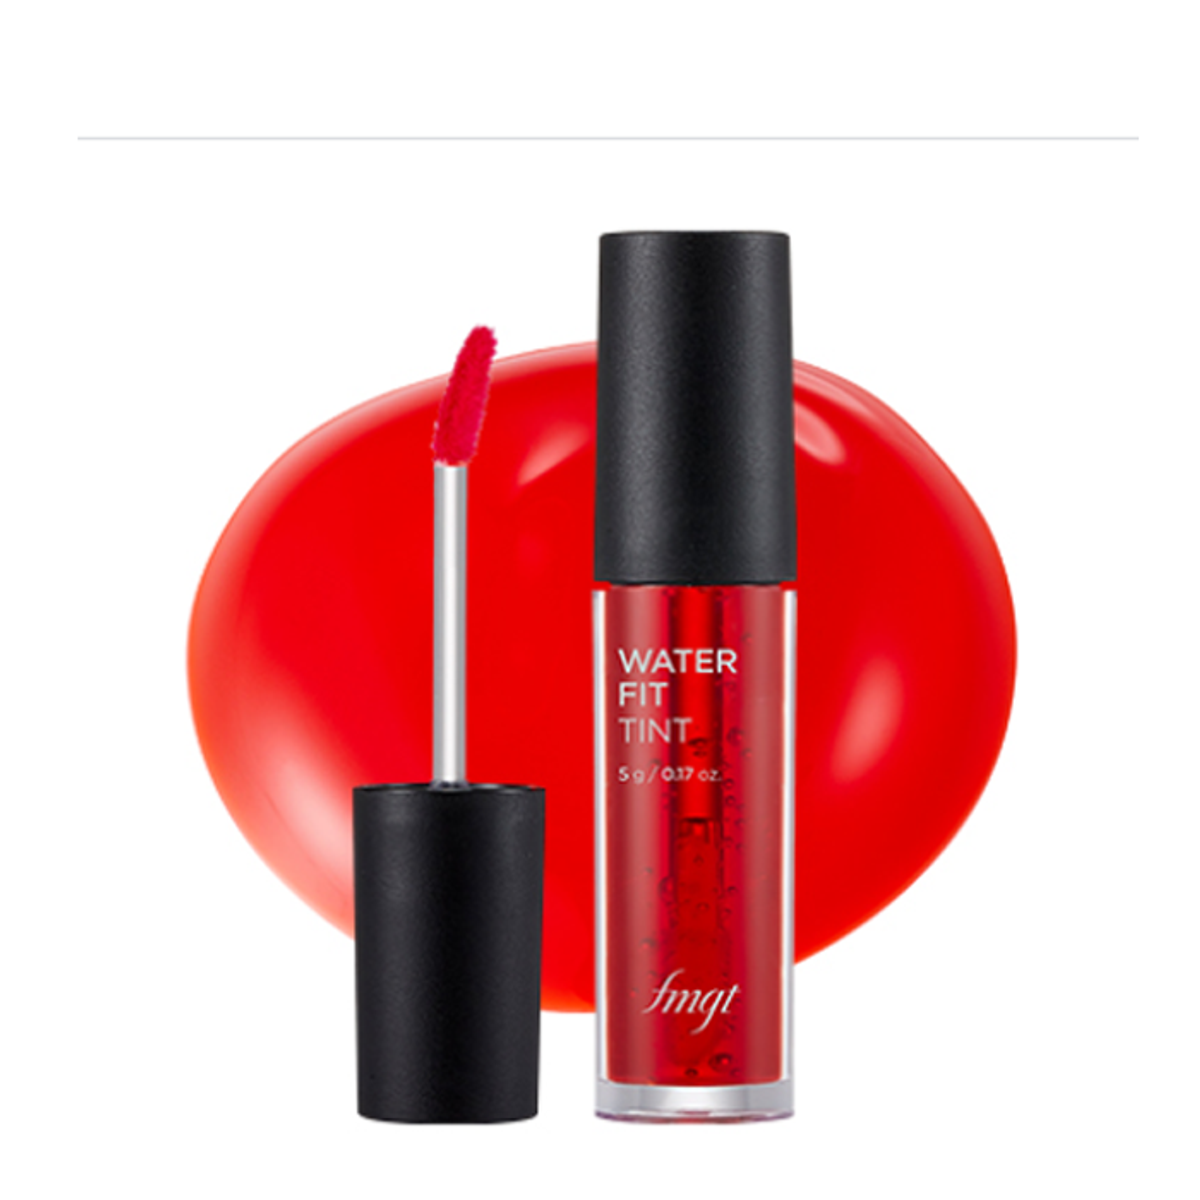 son-tint-thefaceshop-water-fit-lip-tint-5g-2